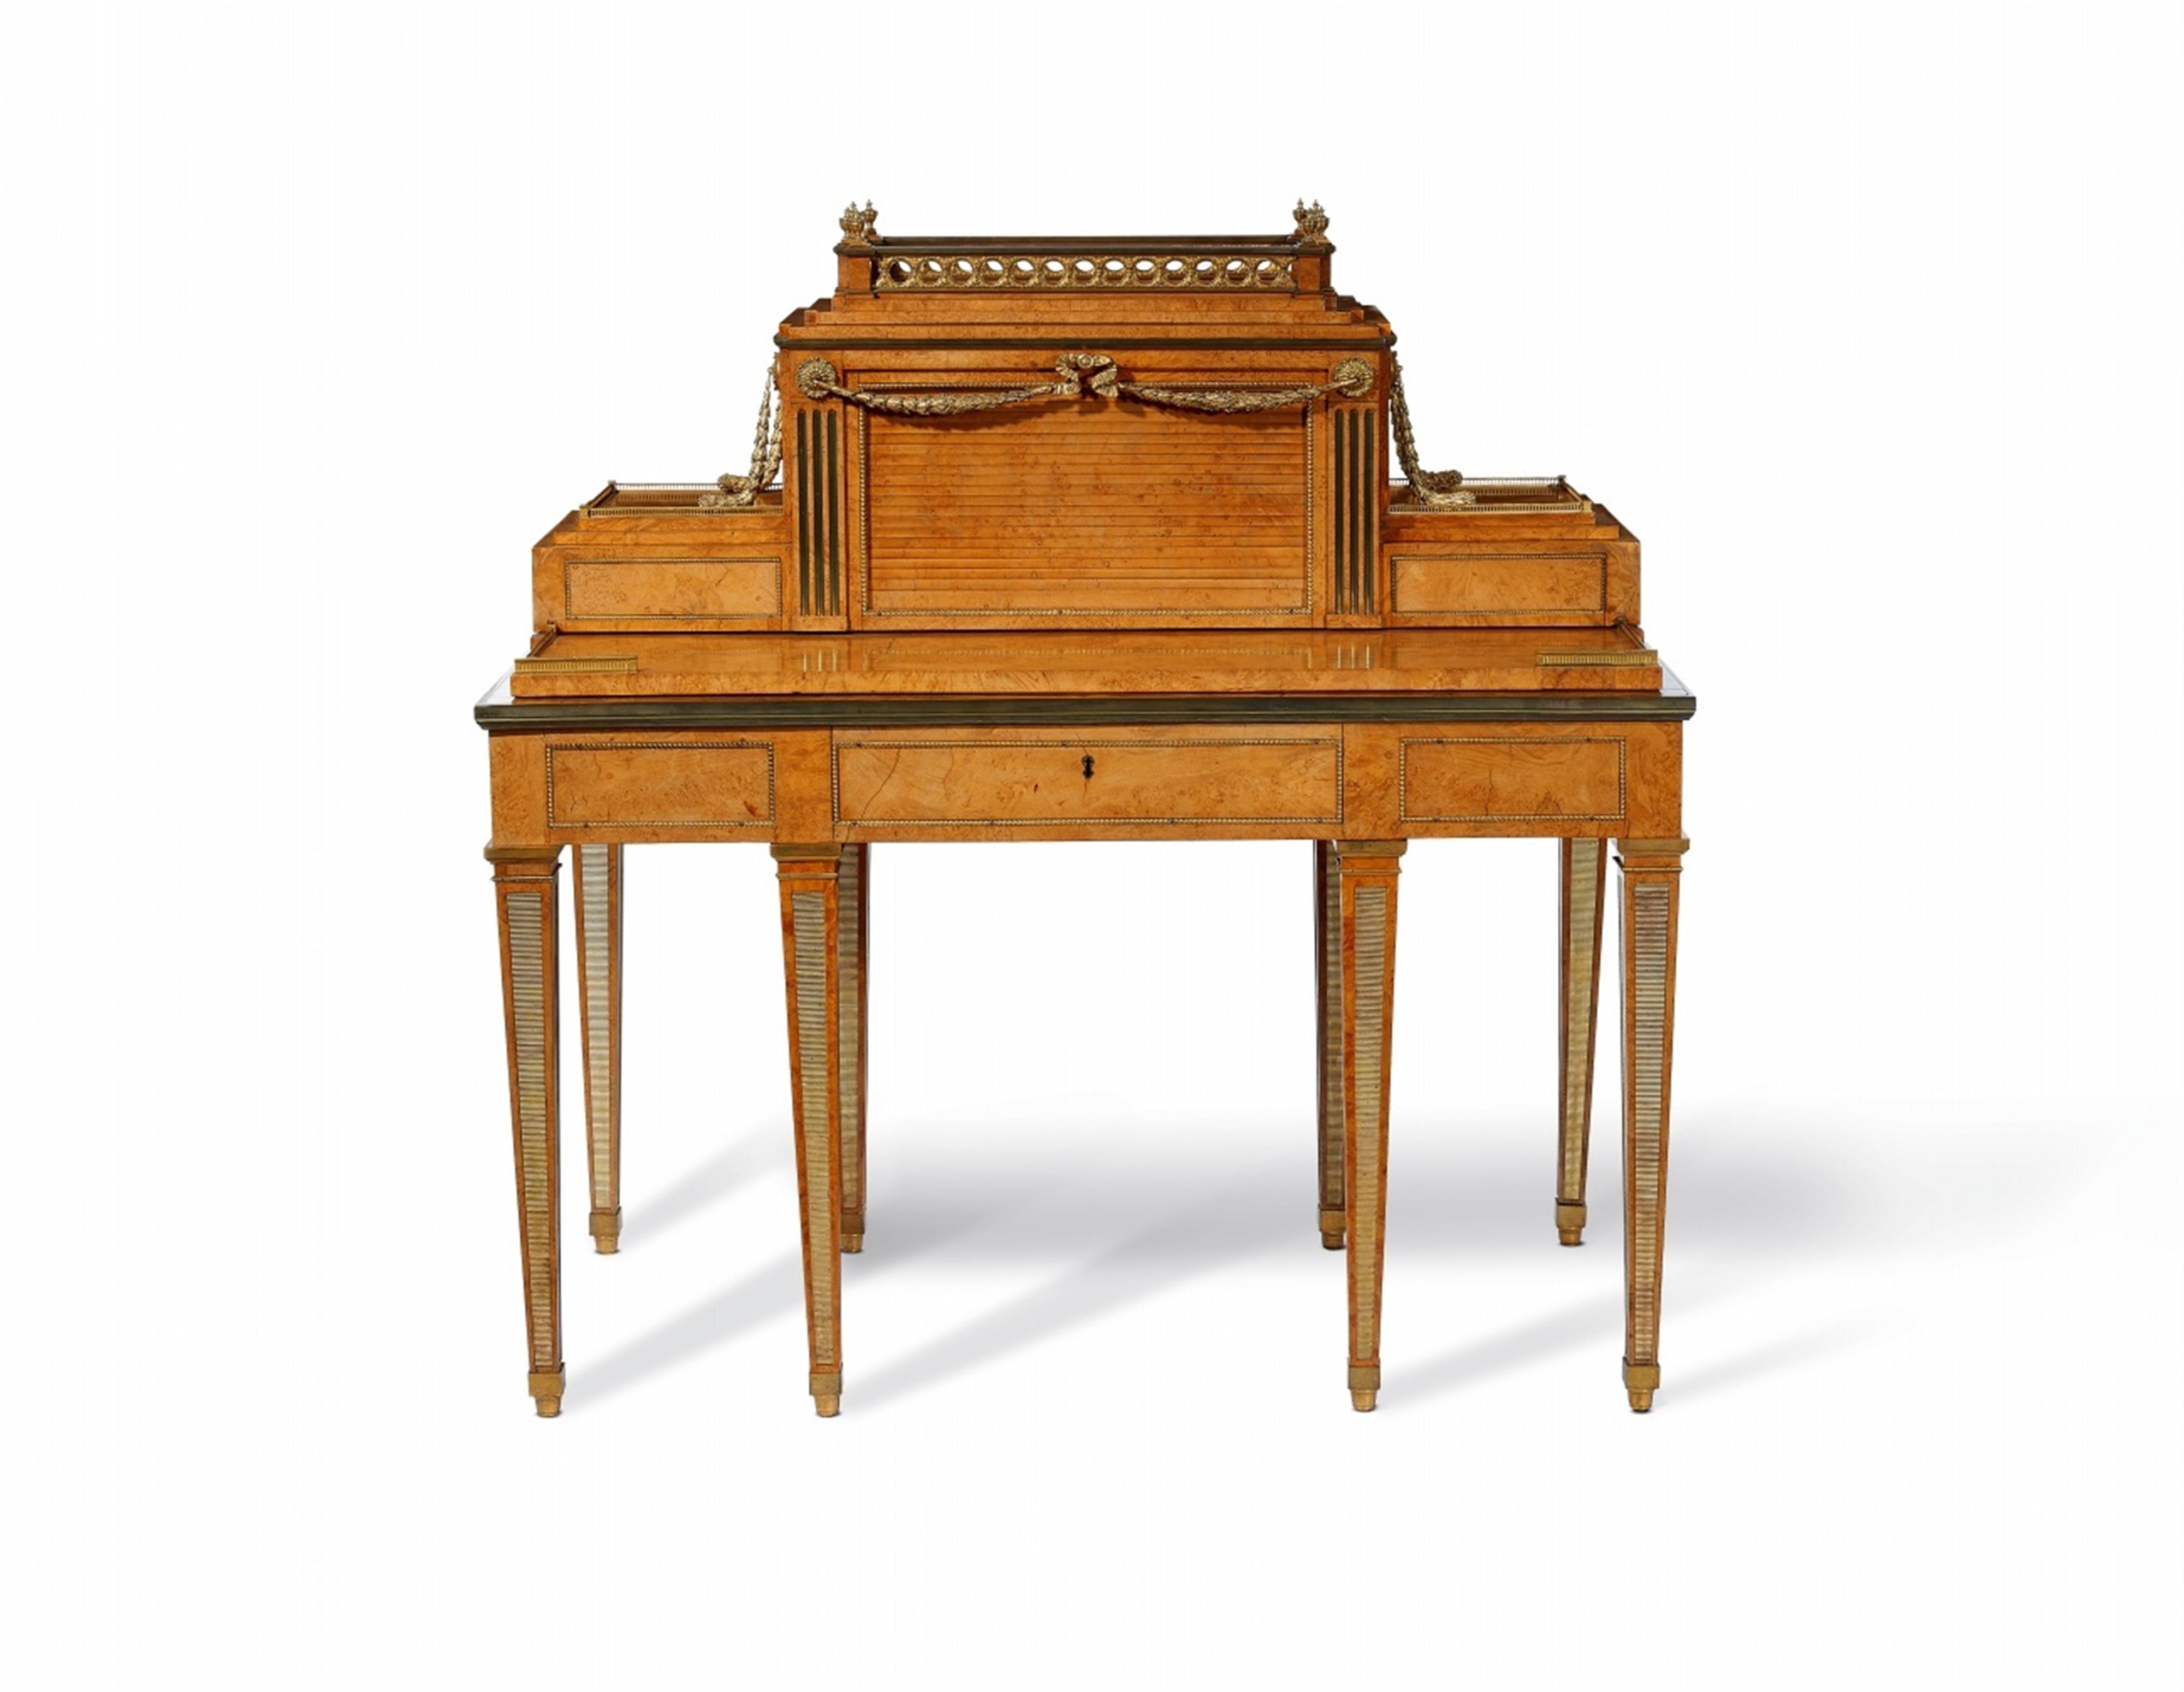 An Imperial writing desk by David Roentgen - image-1